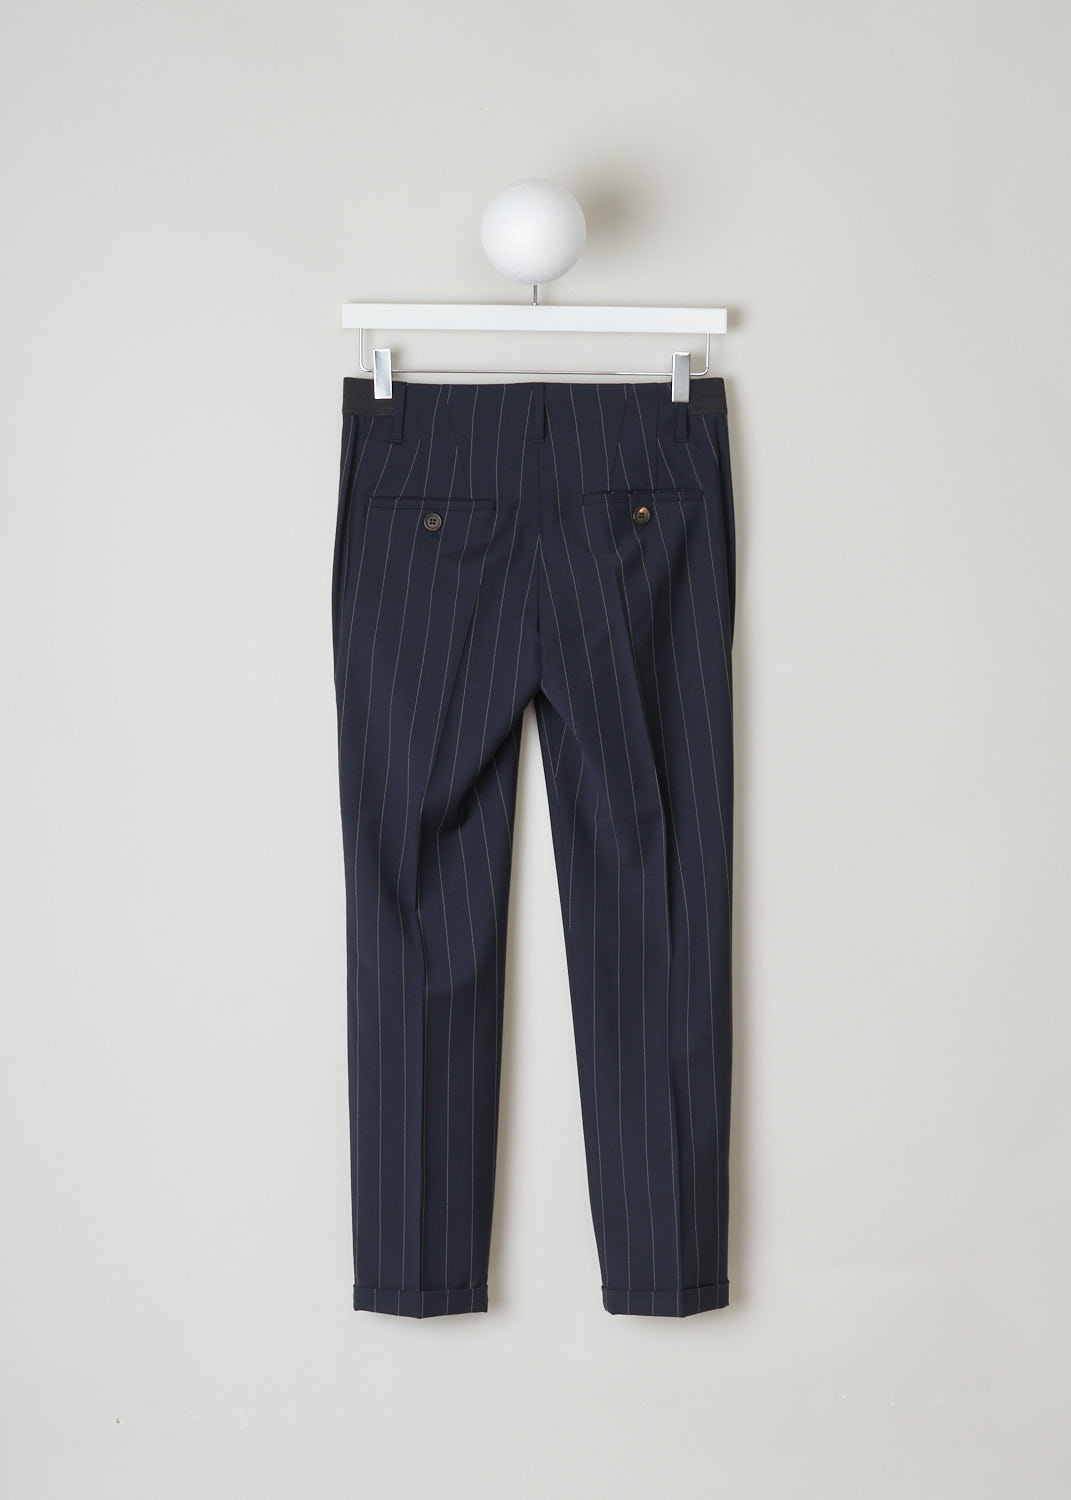 BRUNELLO CUCINELLI, NAVY BLUE TROUSERS WITH PINSTRIPE, M0H35P1500_C6009, Blue, Back, These navy blue pinstripe trousers are made of a wool blend. Featuring a partly elasticated waistline, forward slanted pockets in the front, and two buttoned welt pockets in the back. Along the length of the pant leg, centre creases can be found. These trousers have a folded hem.
